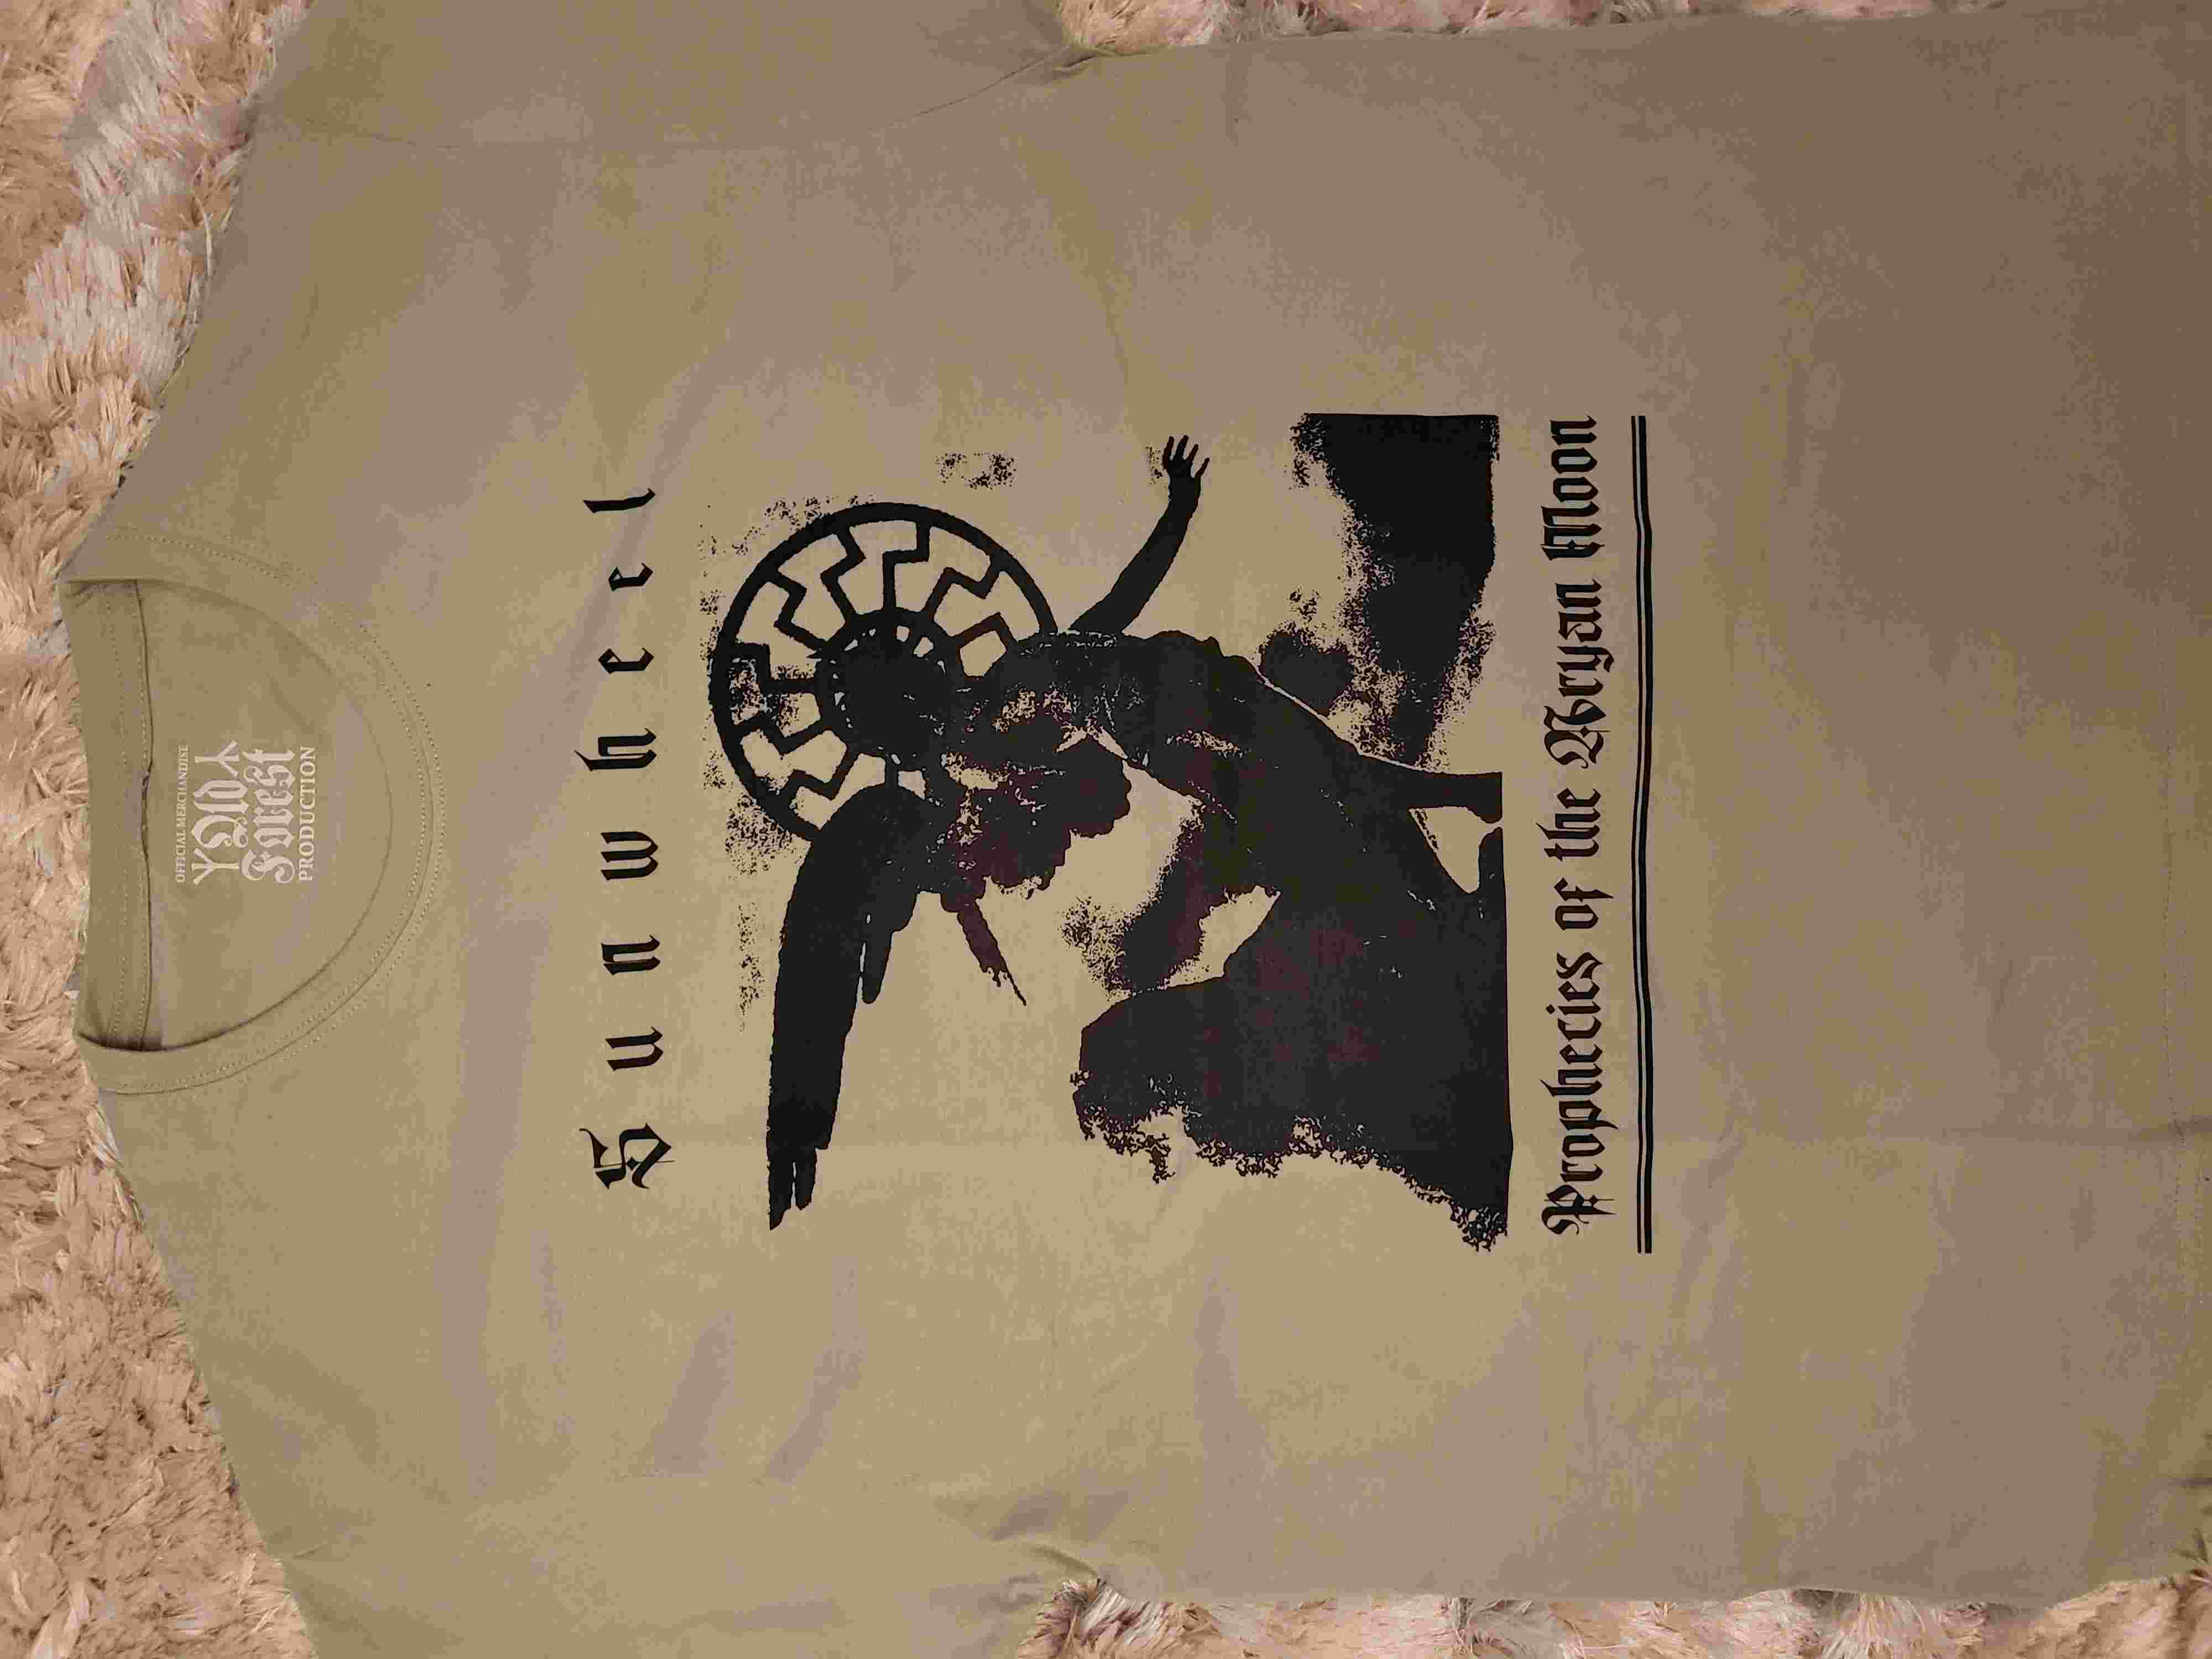 Sunwheel -Prophecies of Aryan Moon official ts 1 lim.30 - Old Forest Production image 1